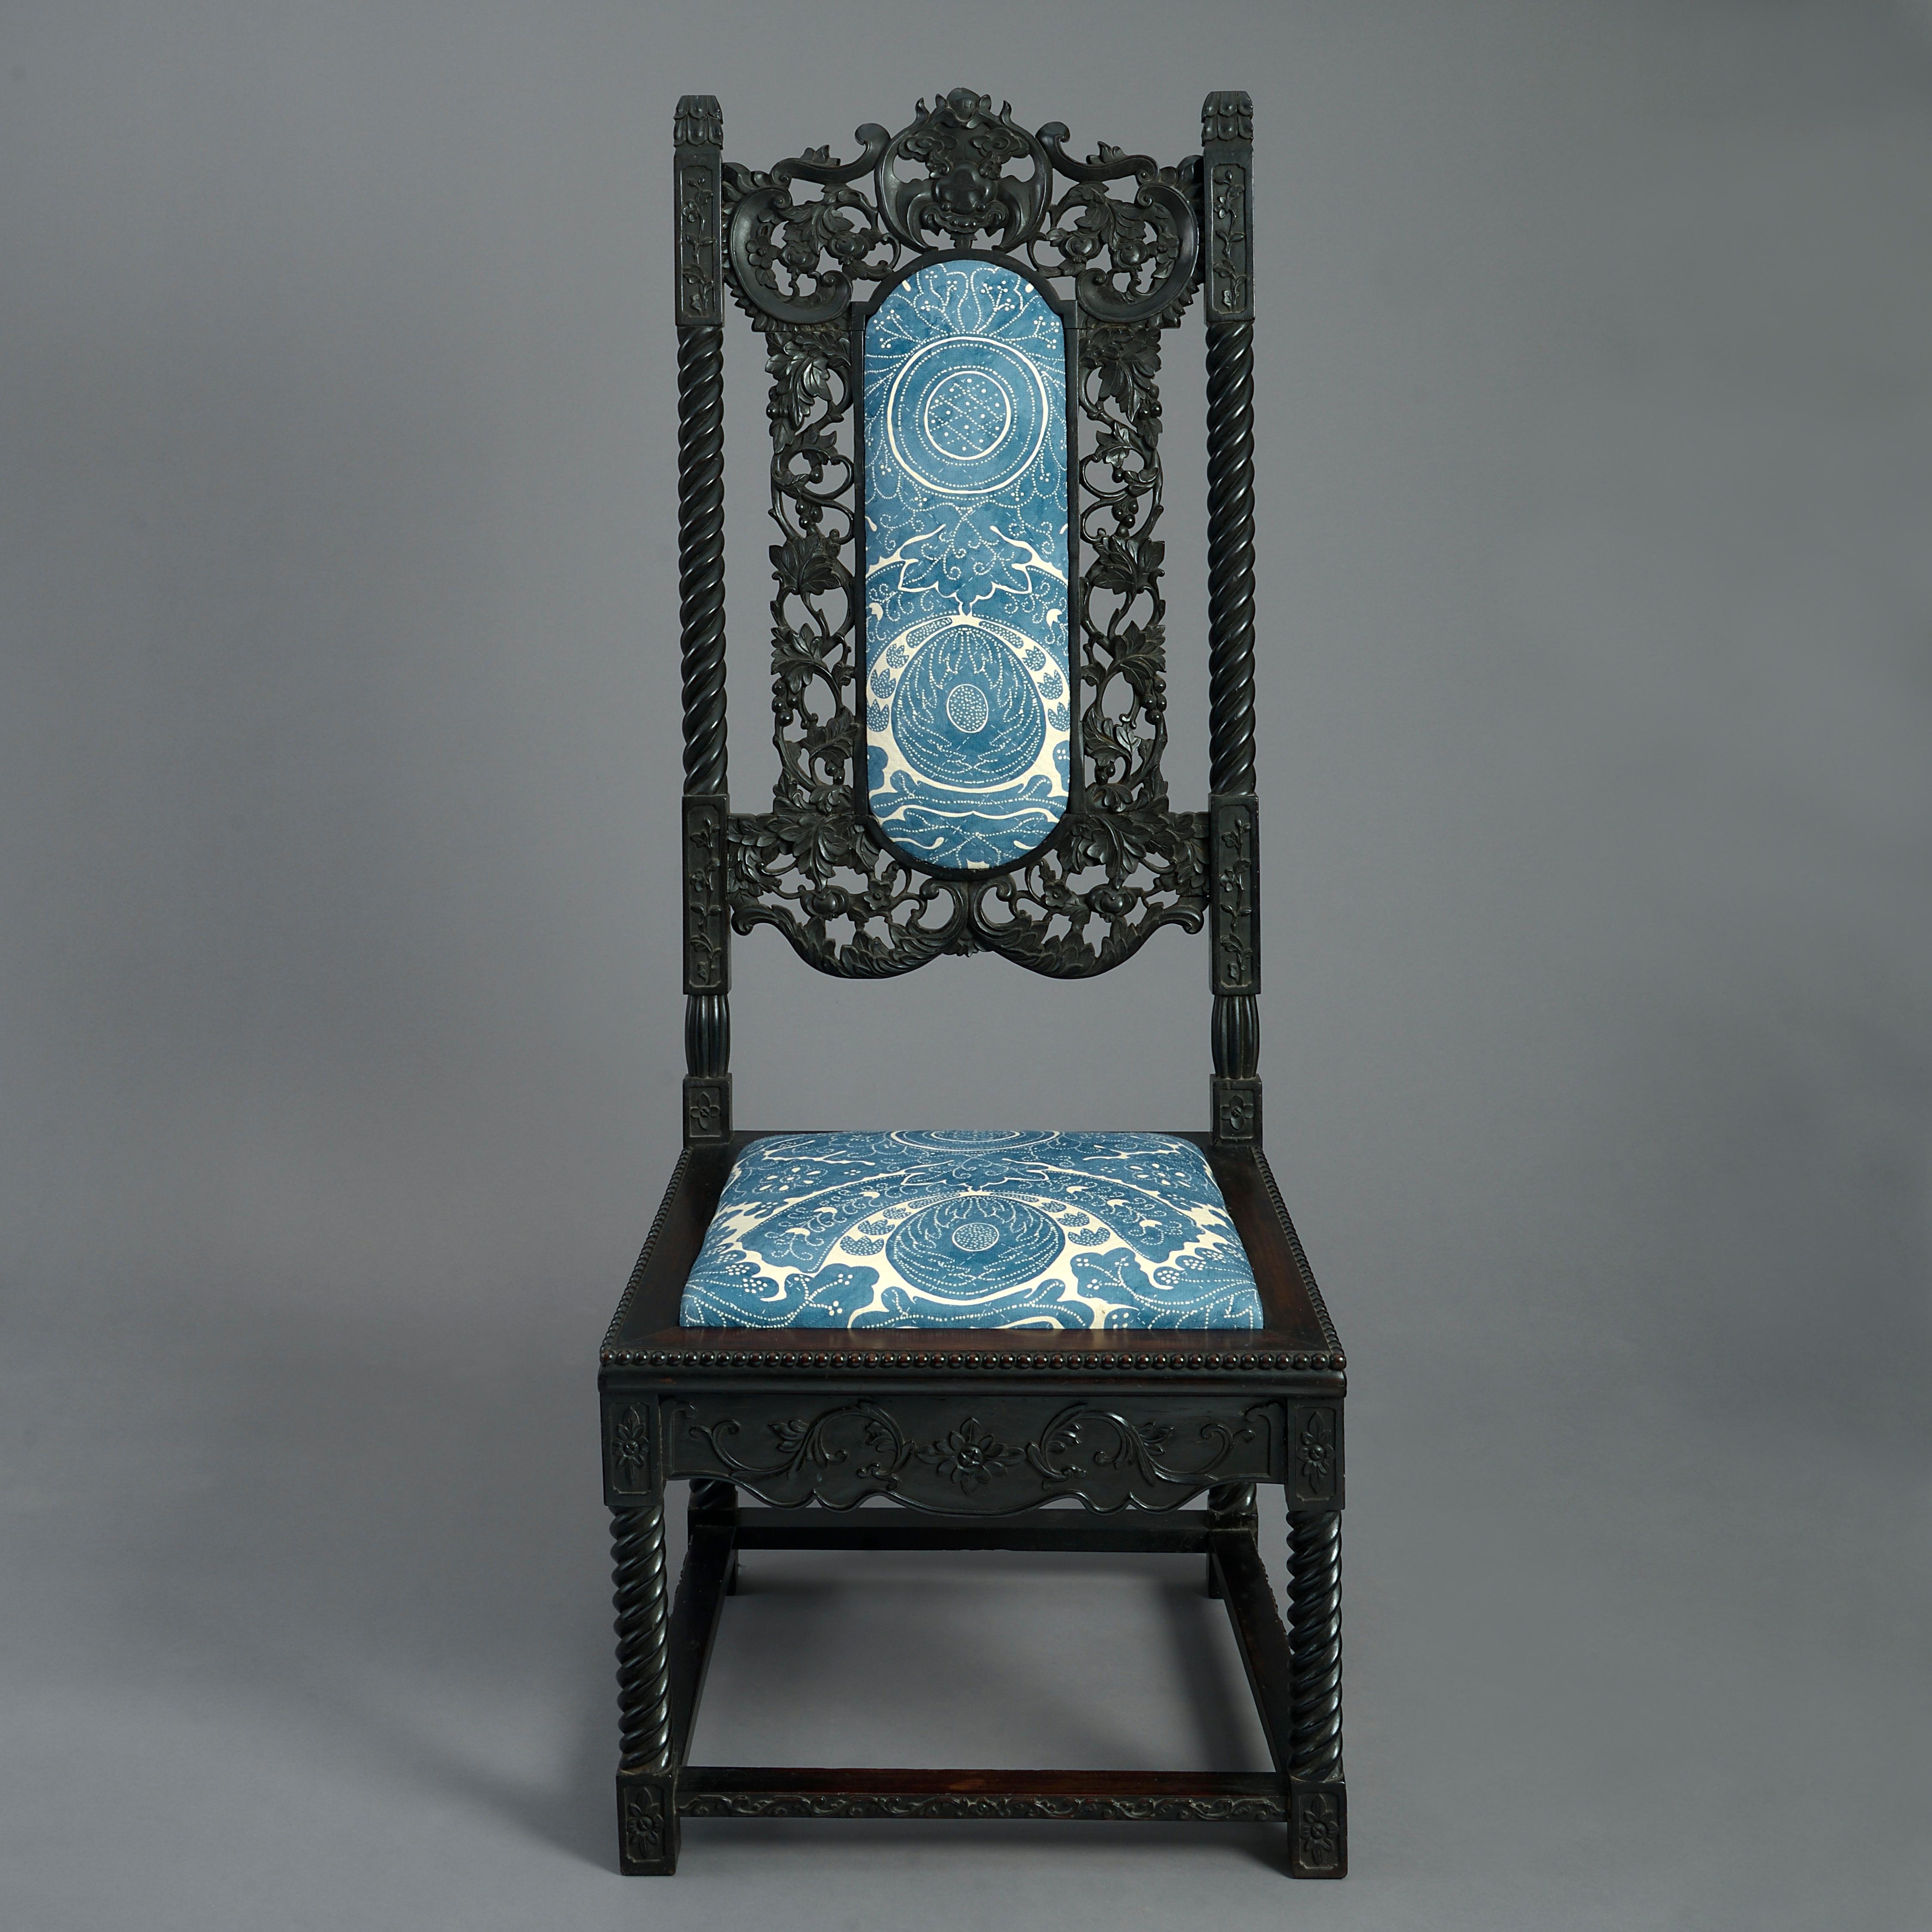 A late nineteenth century ebony high back side chair, with richly carved floral motifs throughout, the seat and back supports with barley twists and having an upholstered pad and drop-in seat.

 